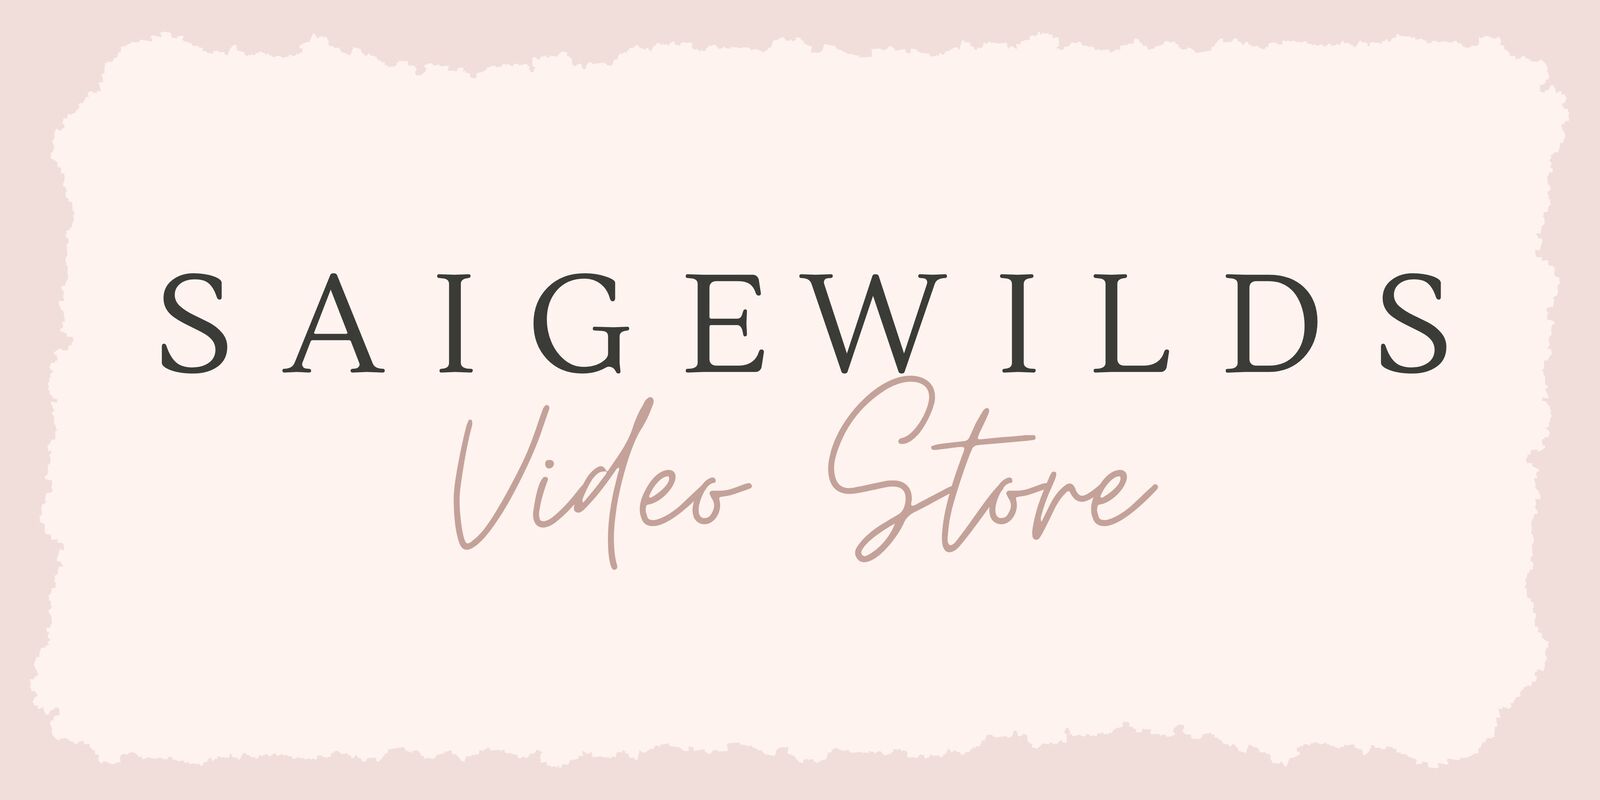 See Saige Wilds Video Store profile